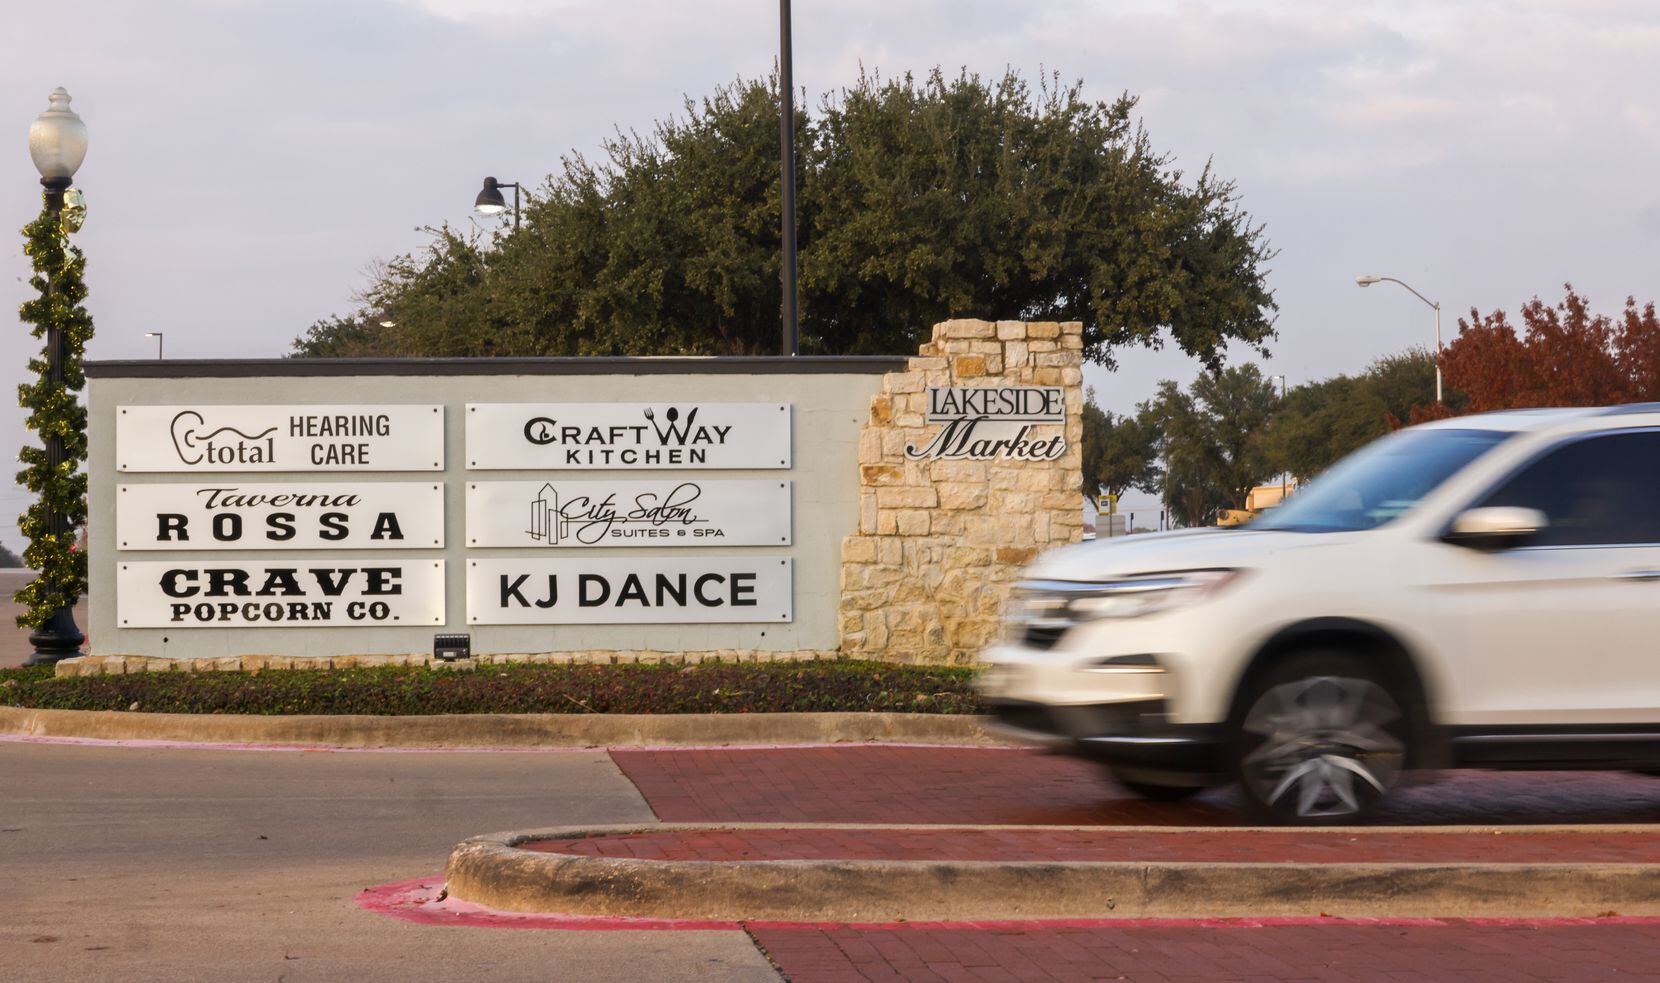 Traffic moves by the entrance to Lakeside Market along Preston Road in Plano on Dec. 7.